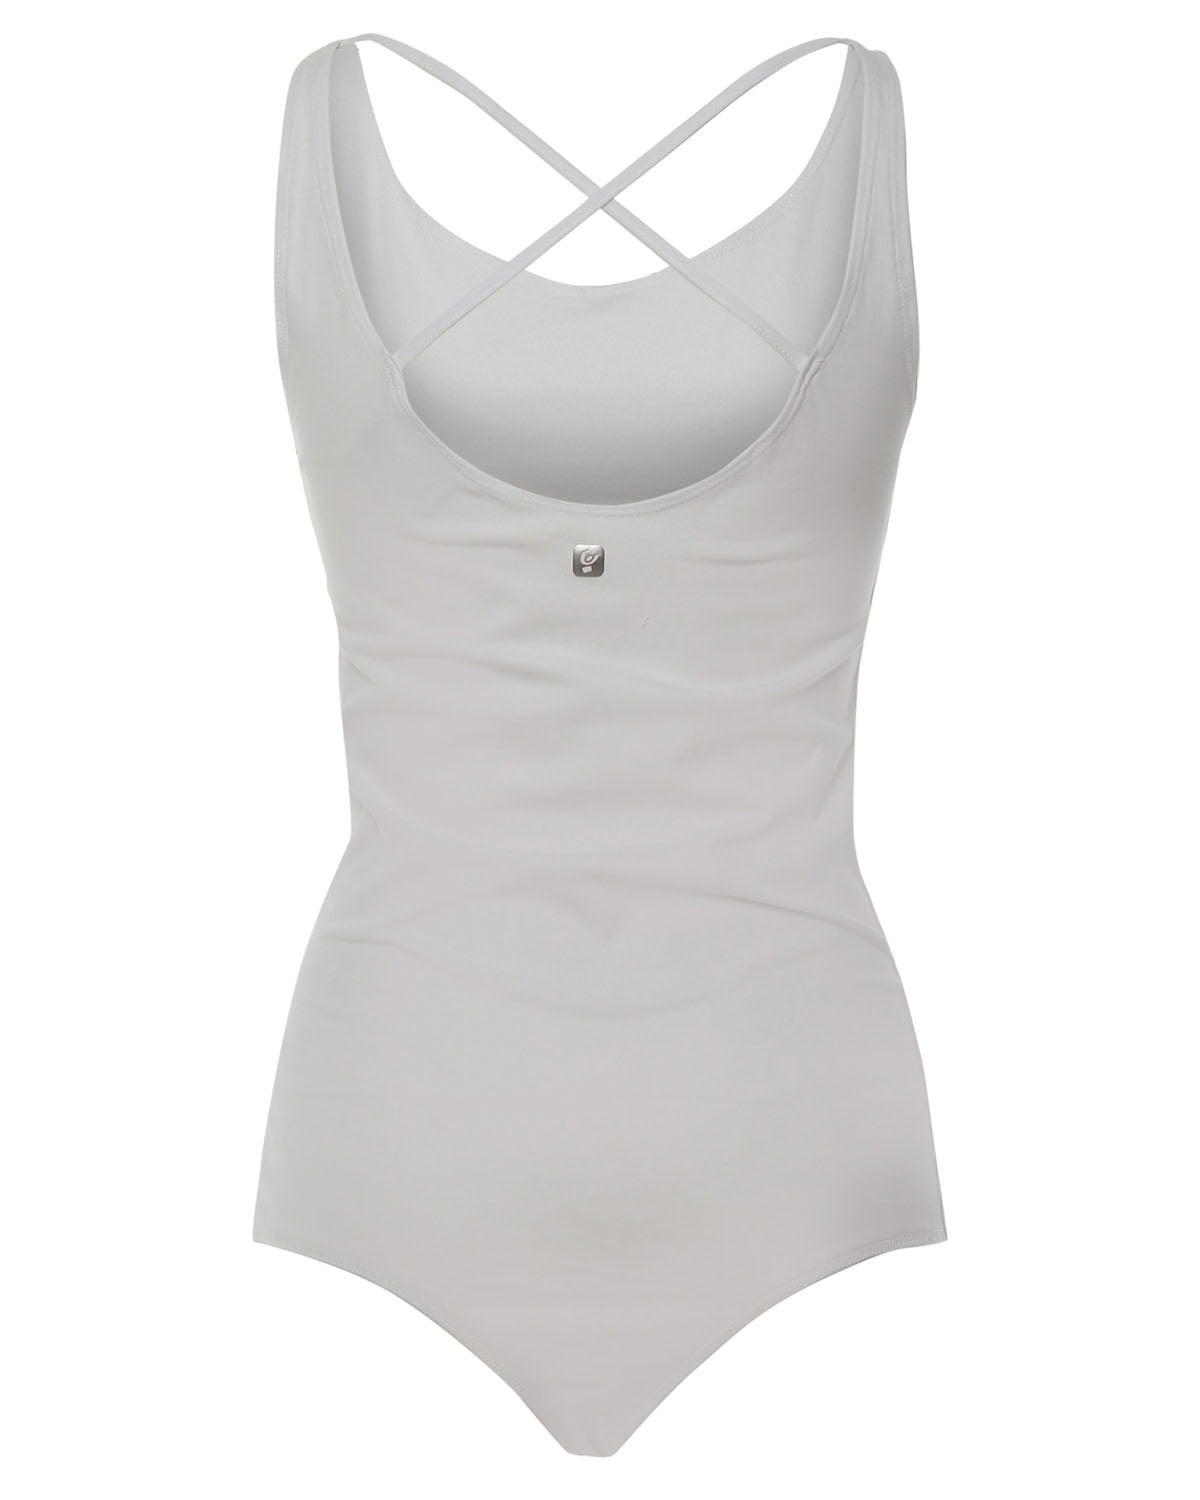 (WB04N00-JES-W) Leotard With Deep Scoop Neckline In Back And Double, Crossed Shoulder Straps White